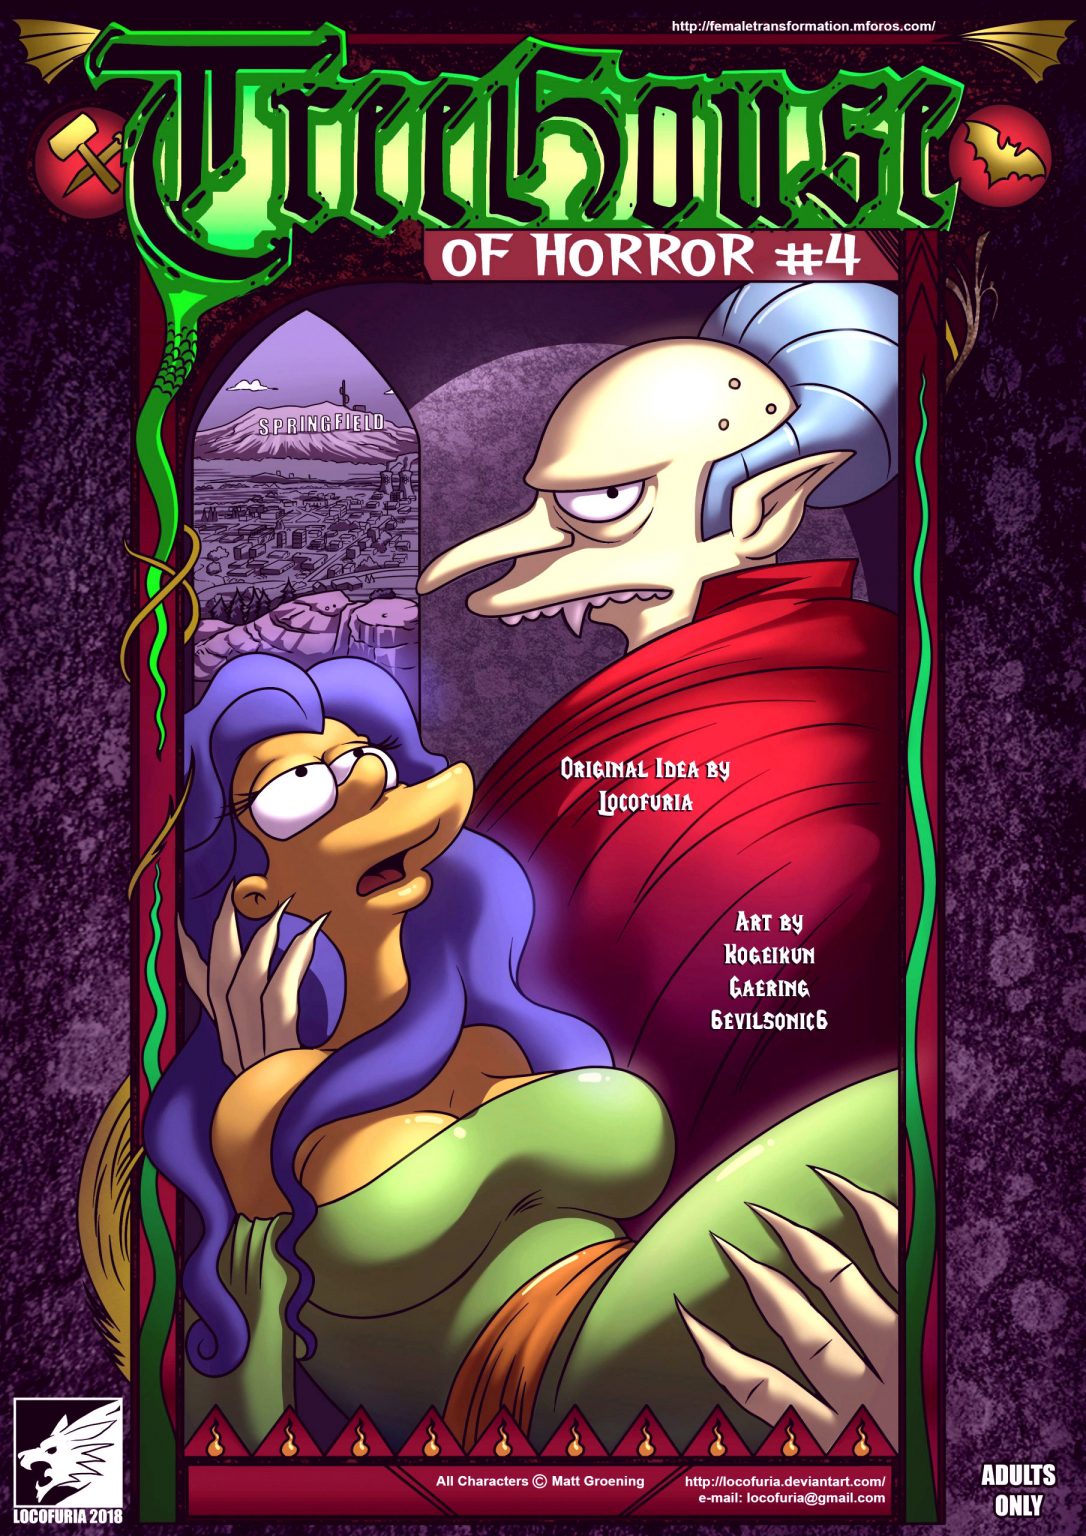 Treehouse of horror 4 porn comic picture 1